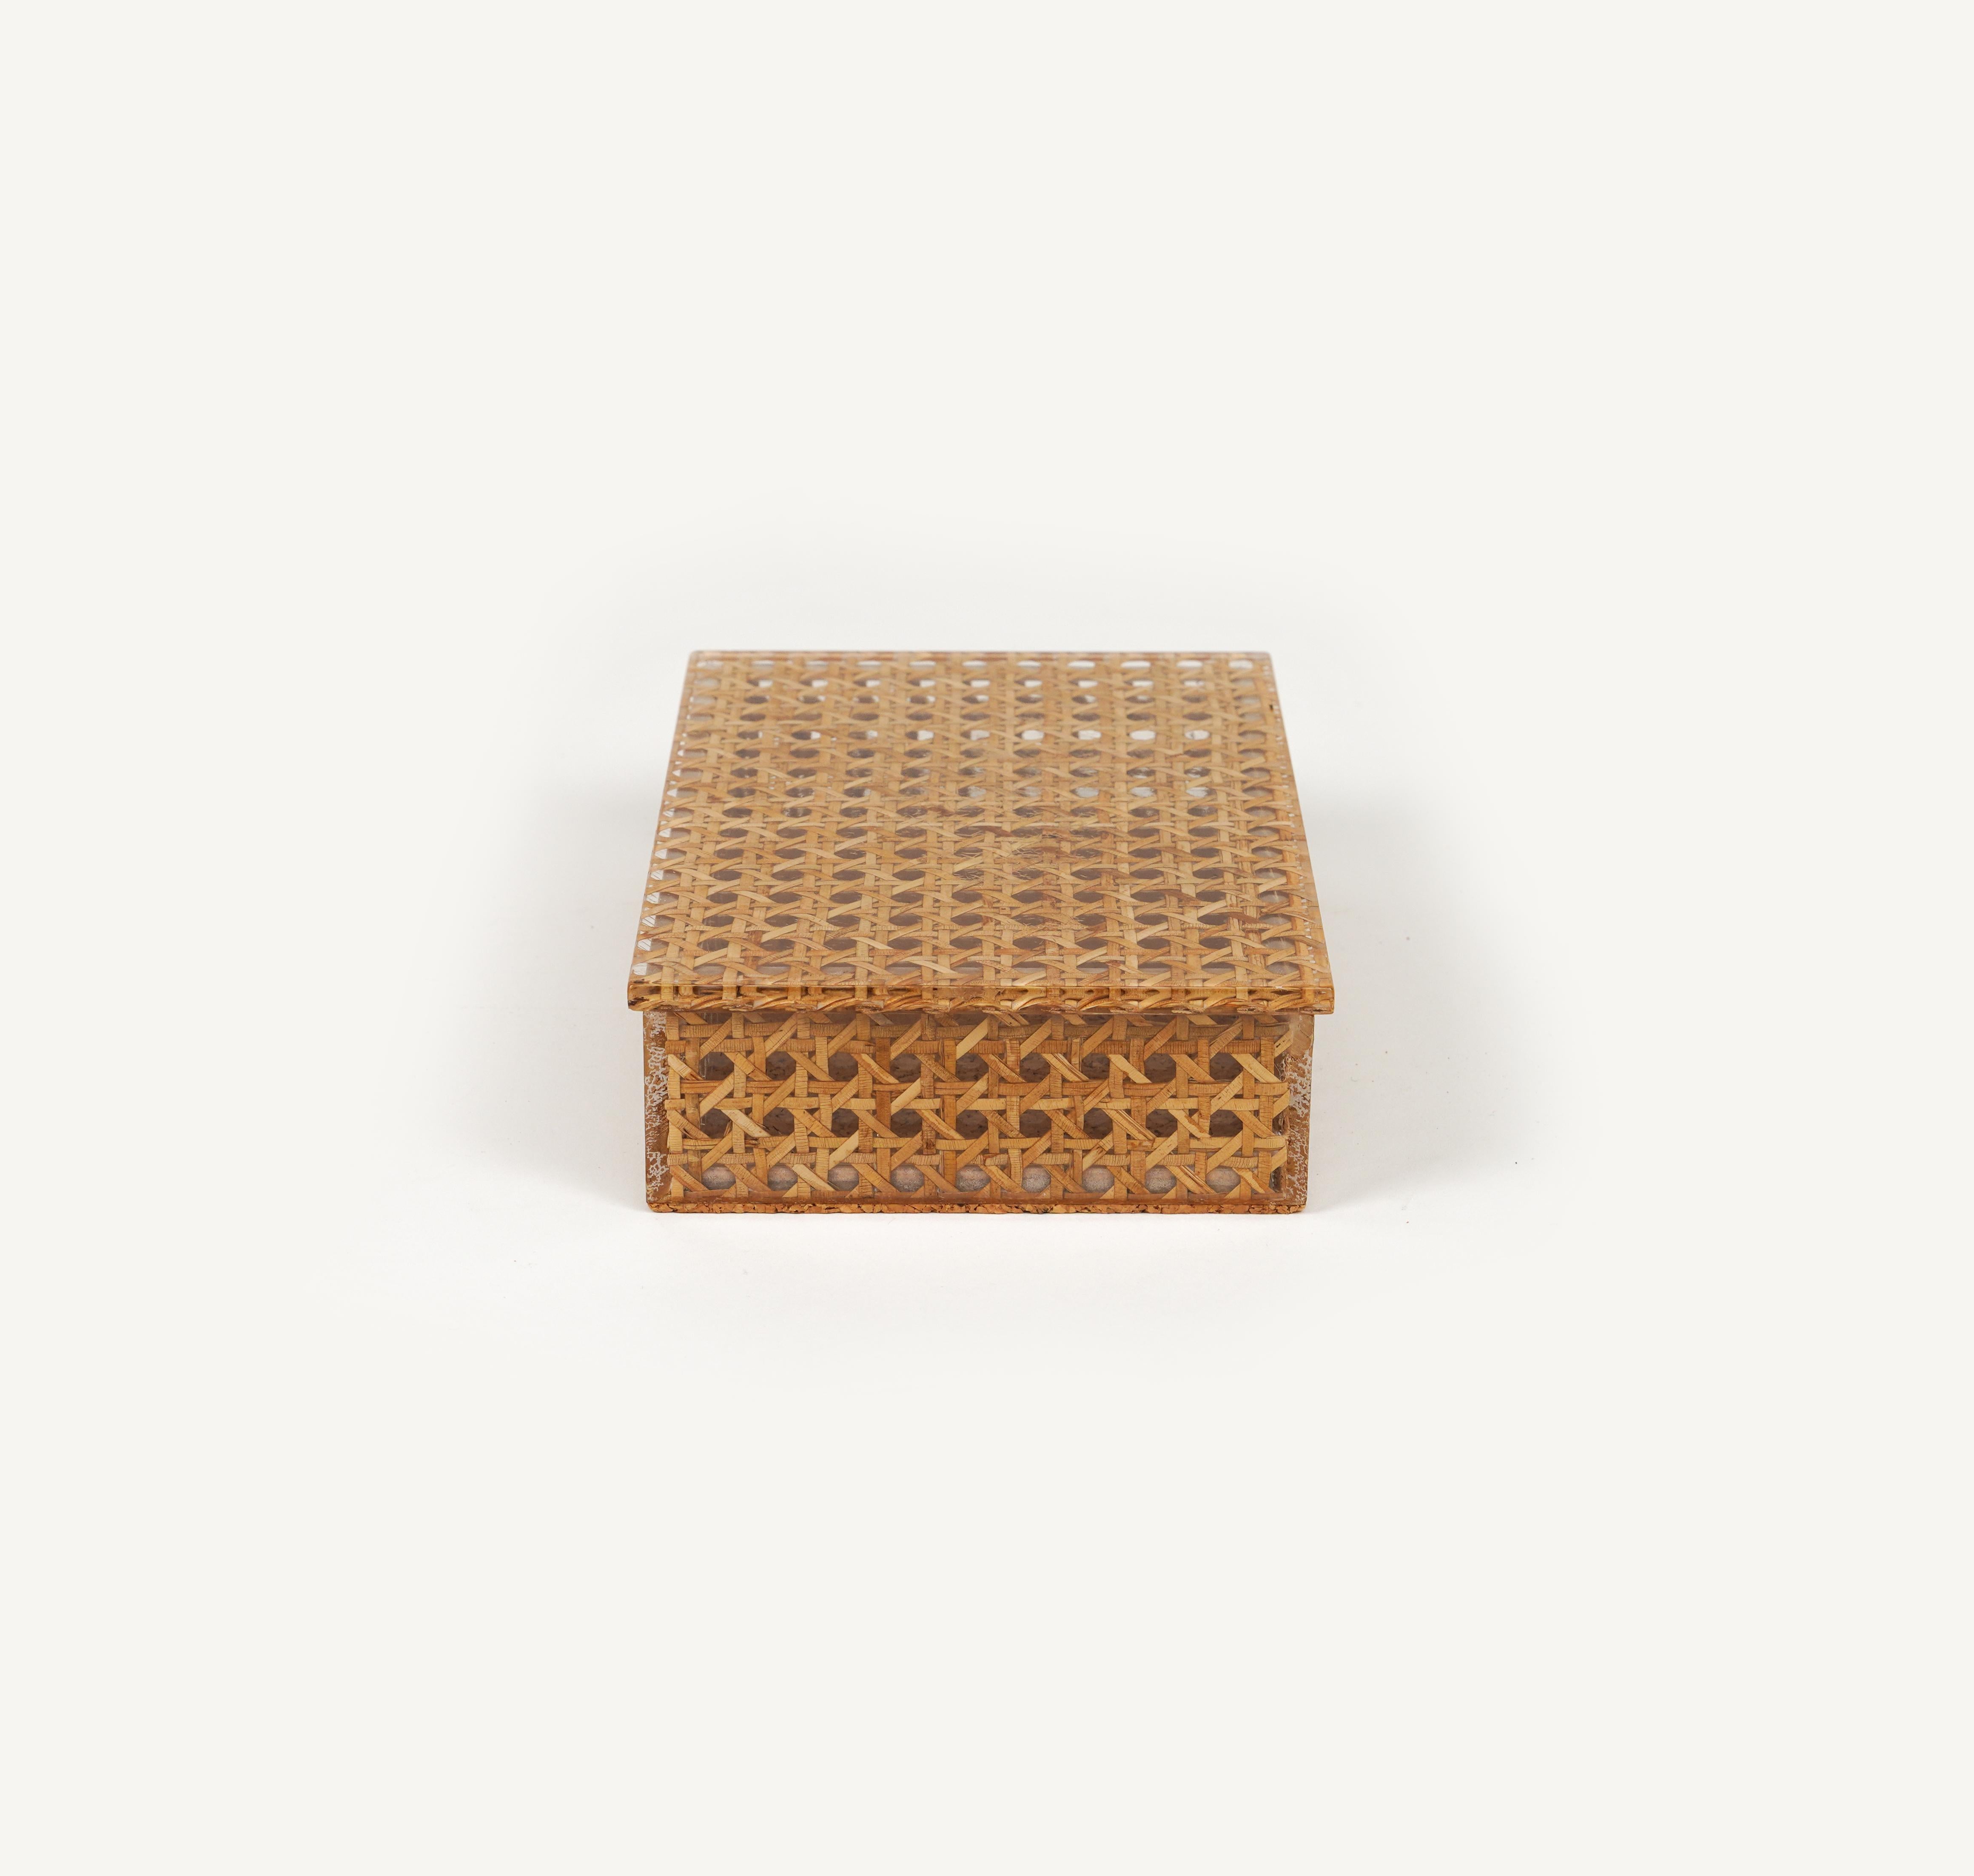 Midcentury Box in Rattan, Lucite and Cork Christian Dior Style, Italy 1970s For Sale 5